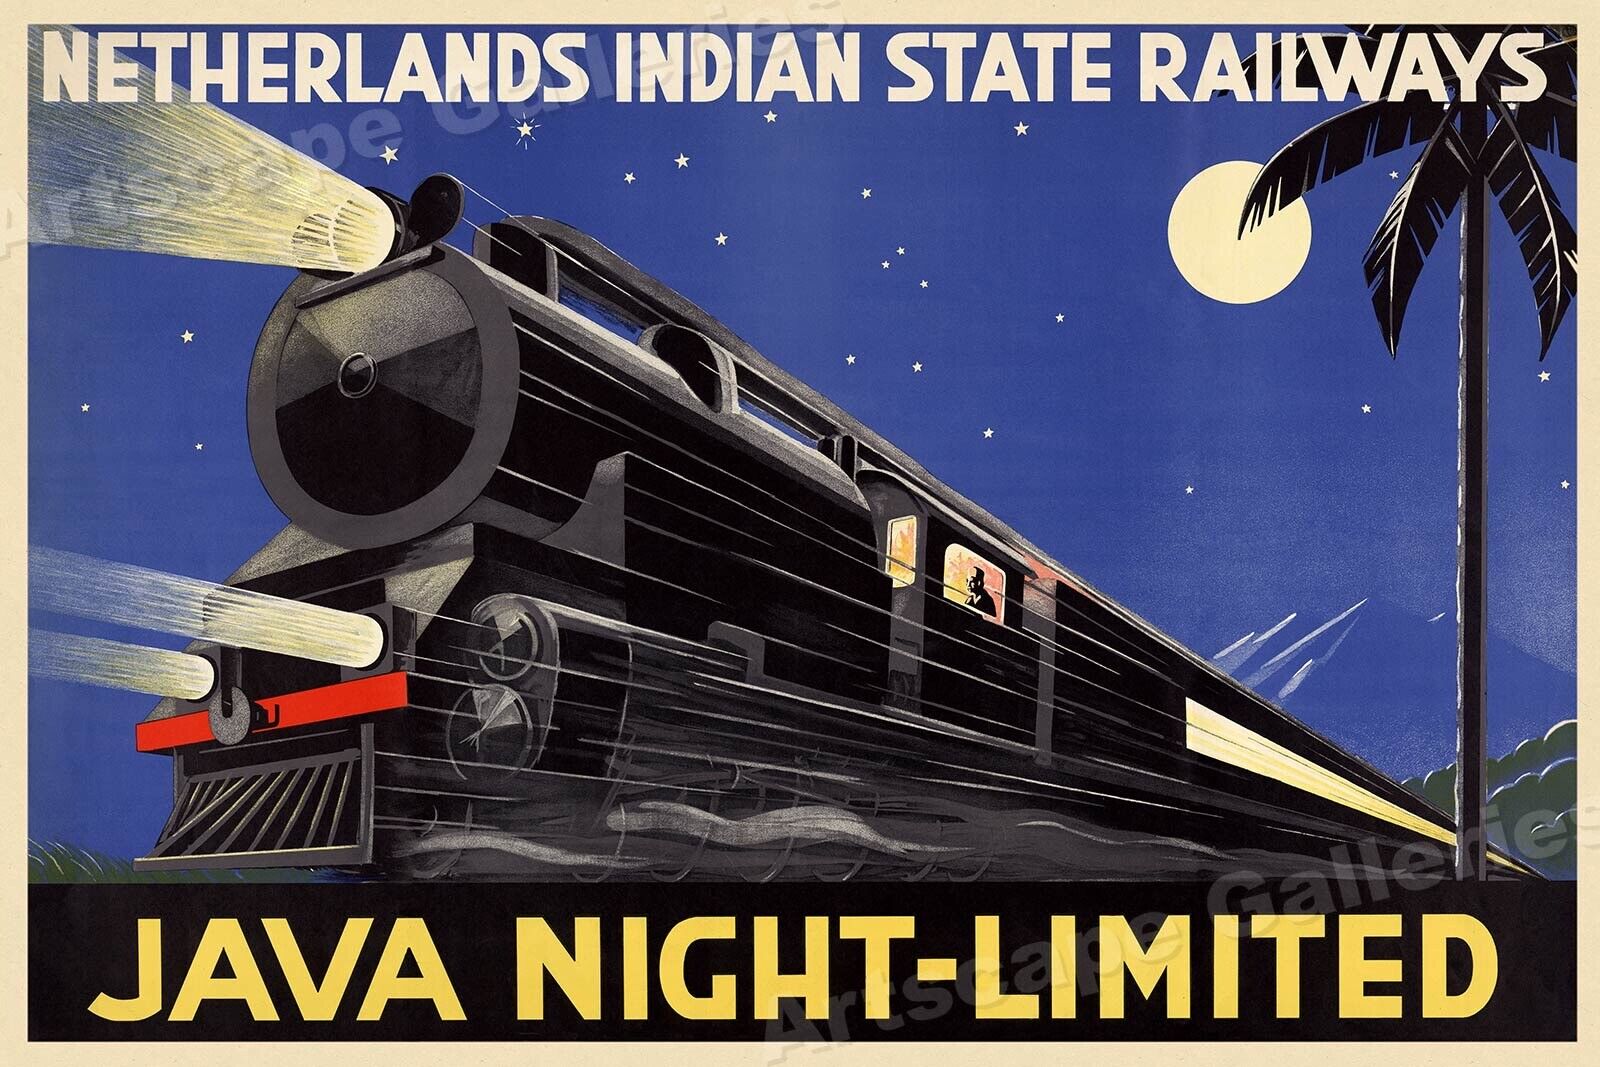 1930s Java Night Limited Indian State Railway Travel Poster - 16x24